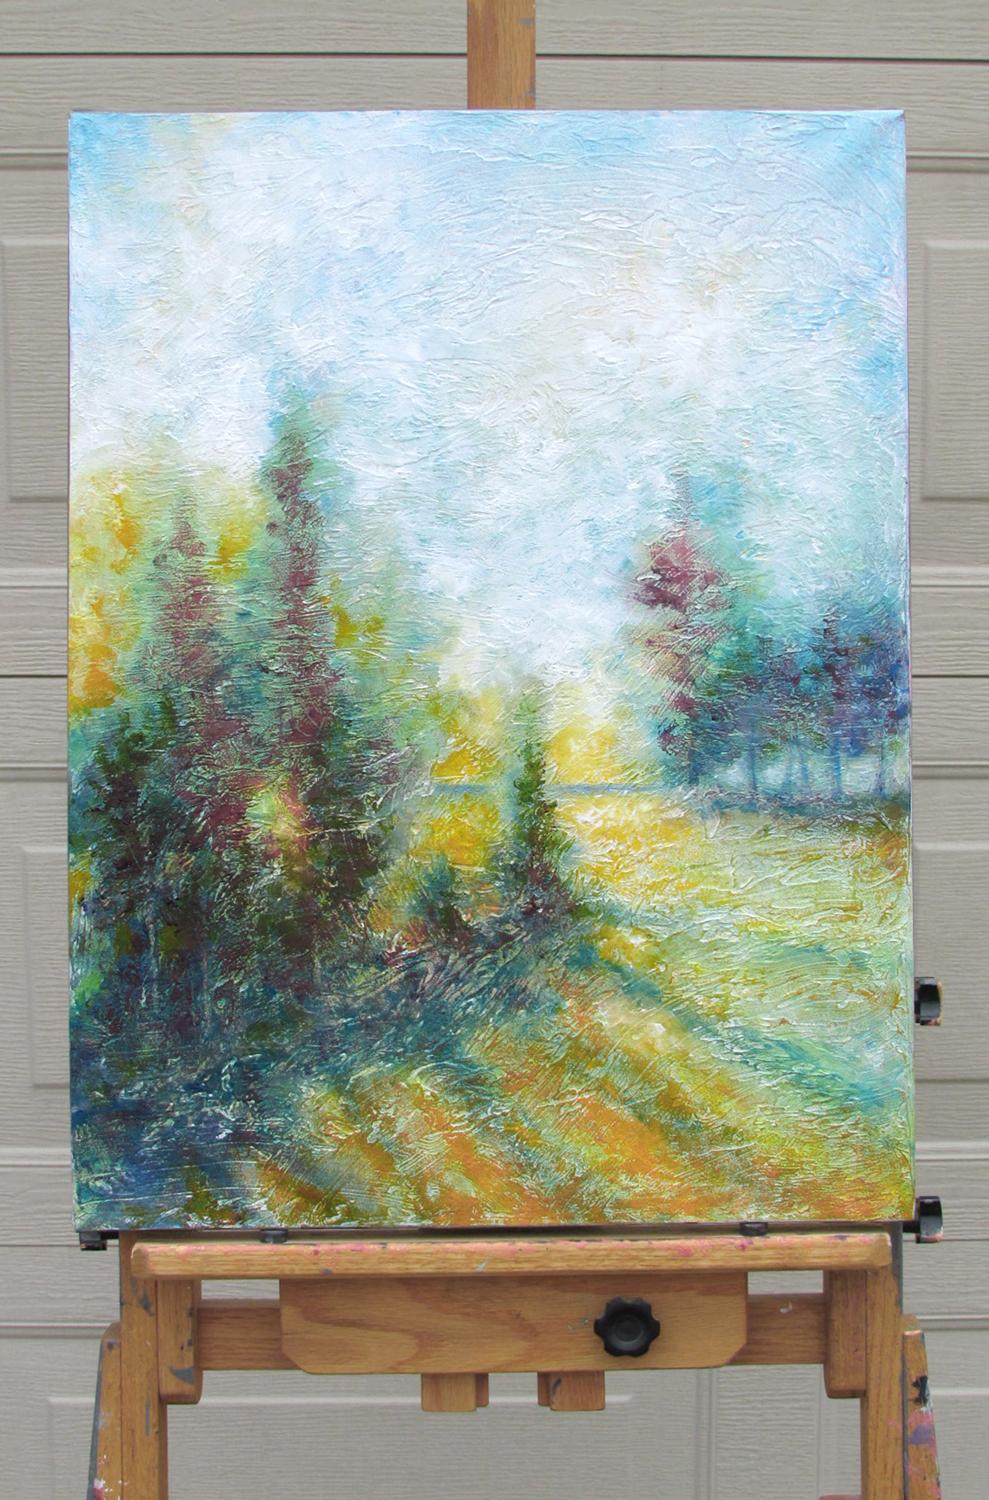 Another Glow, Oil Painting - Gray Landscape Painting by Valerie Berkely